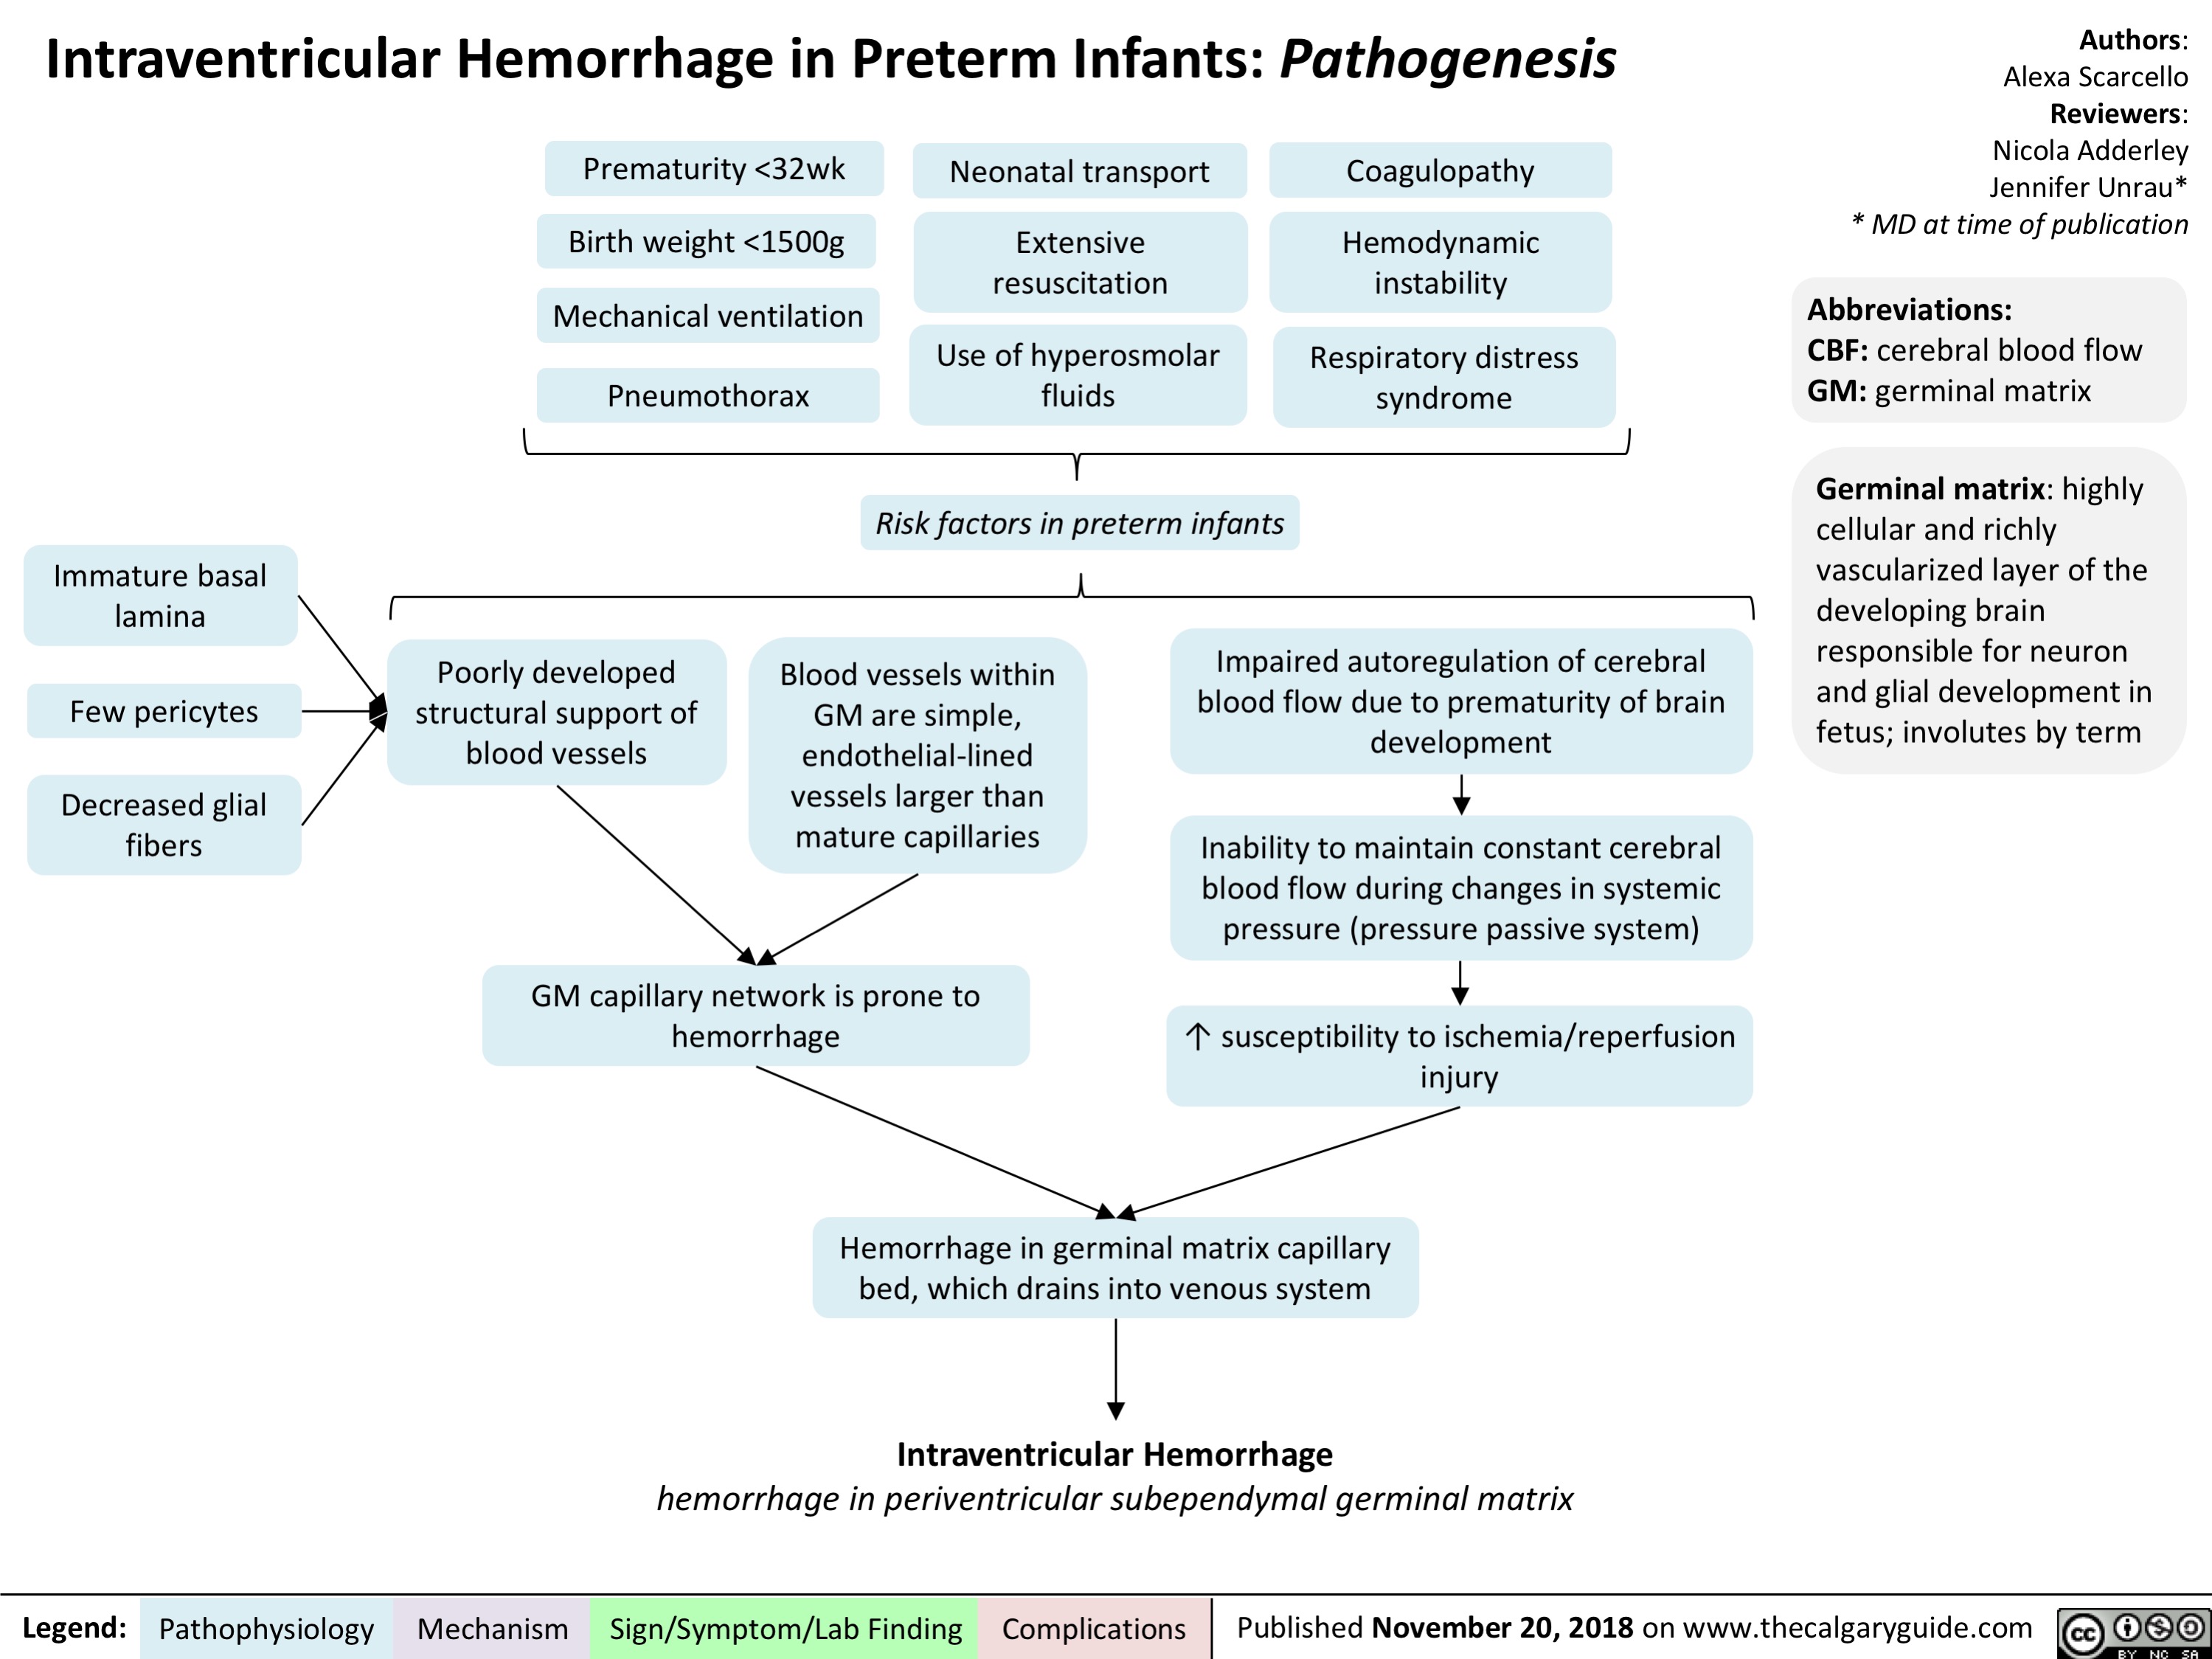 Intraventricular Hemorrhage in Preterm Infants: Pathogenesis
Authors: Alexa Scarcello Reviewers: Nicola Adderley Jennifer Unrau* * MD at time of publication
Abbreviations:
CBF: cerebral blood flow GM: germinal matrix
Germinal matrix: highly cellular and richly vascularized layer of the developing brain responsible for neuron and glial development in fetus; involutes by term
   Prematurity <32wk Birth weight <1500g
Mechanical ventilation Pneumothorax
Neonatal transport
Extensive resuscitation
Use of hyperosmolar fluids
Risk factors in preterm infants
Coagulopathy
Hemodynamic instability
Respiratory distress syndrome
            Immature basal lamina
Few pericytes
Decreased glial fibers
Poorly developed structural support of blood vessels
Blood vessels within GM are simple, endothelial-lined vessels larger than mature capillaries
Impaired autoregulation of cerebral blood flow due to prematurity of brain development
Inability to maintain constant cerebral blood flow during changes in systemic pressure (pressure passive system)
↑ susceptibility to ischemia/reperfusion injury
             GM capillary network is prone to hemorrhage
    Hemorrhage in germinal matrix capillary bed, which drains into venous system
Intraventricular Hemorrhage
hemorrhage in periventricular subependymal germinal matrix
  Legend:
 Pathophysiology
 Mechanism
Sign/Symptom/Lab Finding
  Complications
Published November 20, 2018 on www.thecalgaryguide.com
   